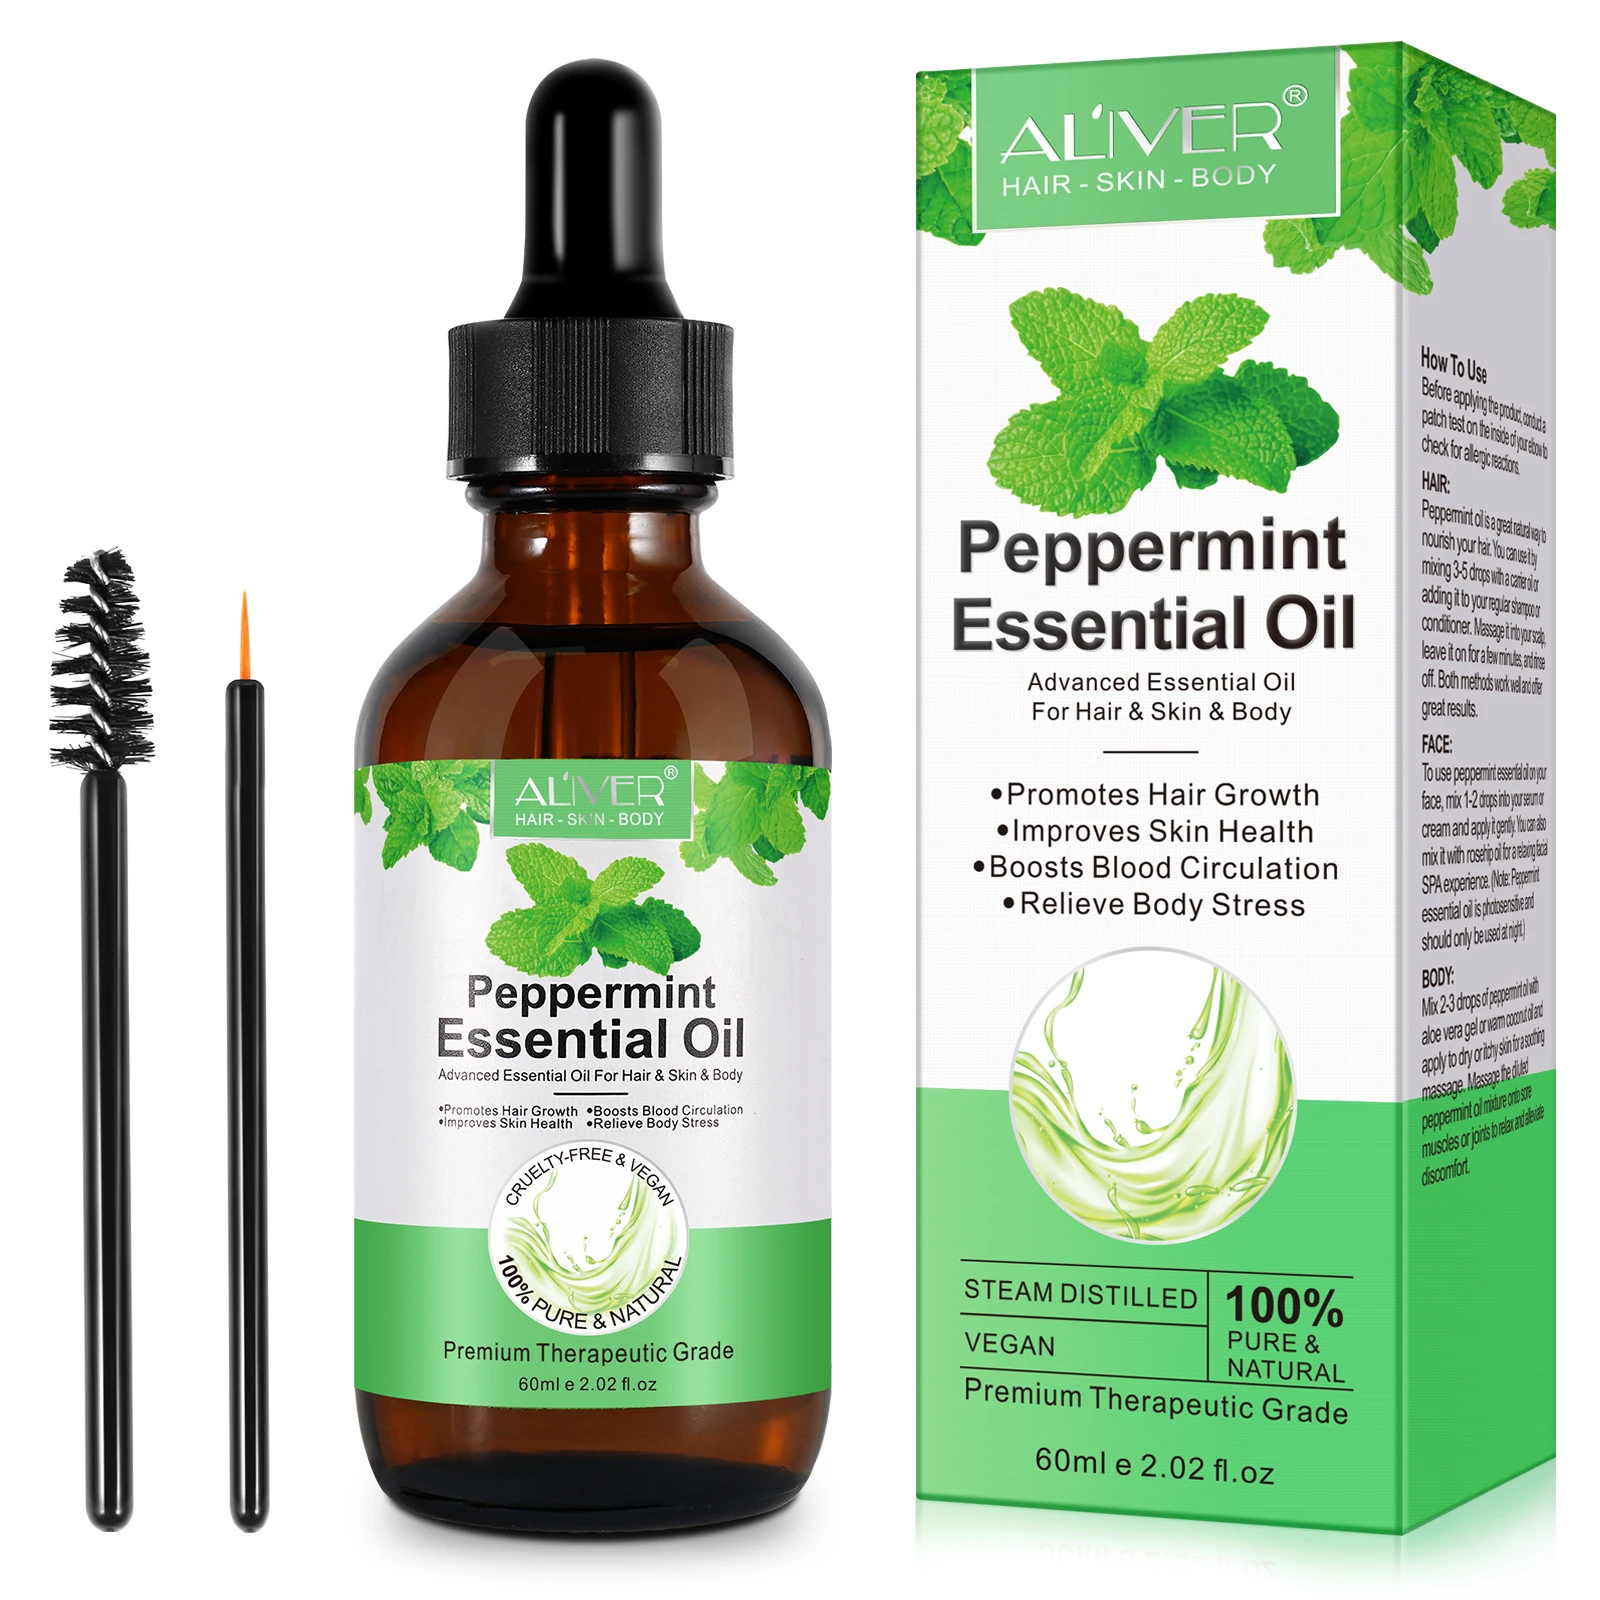 

ALIVER 100% Pure Natural Organic Peppermint Essential Oil For Hair Growth Improves Skin Health Relieve Body Stress